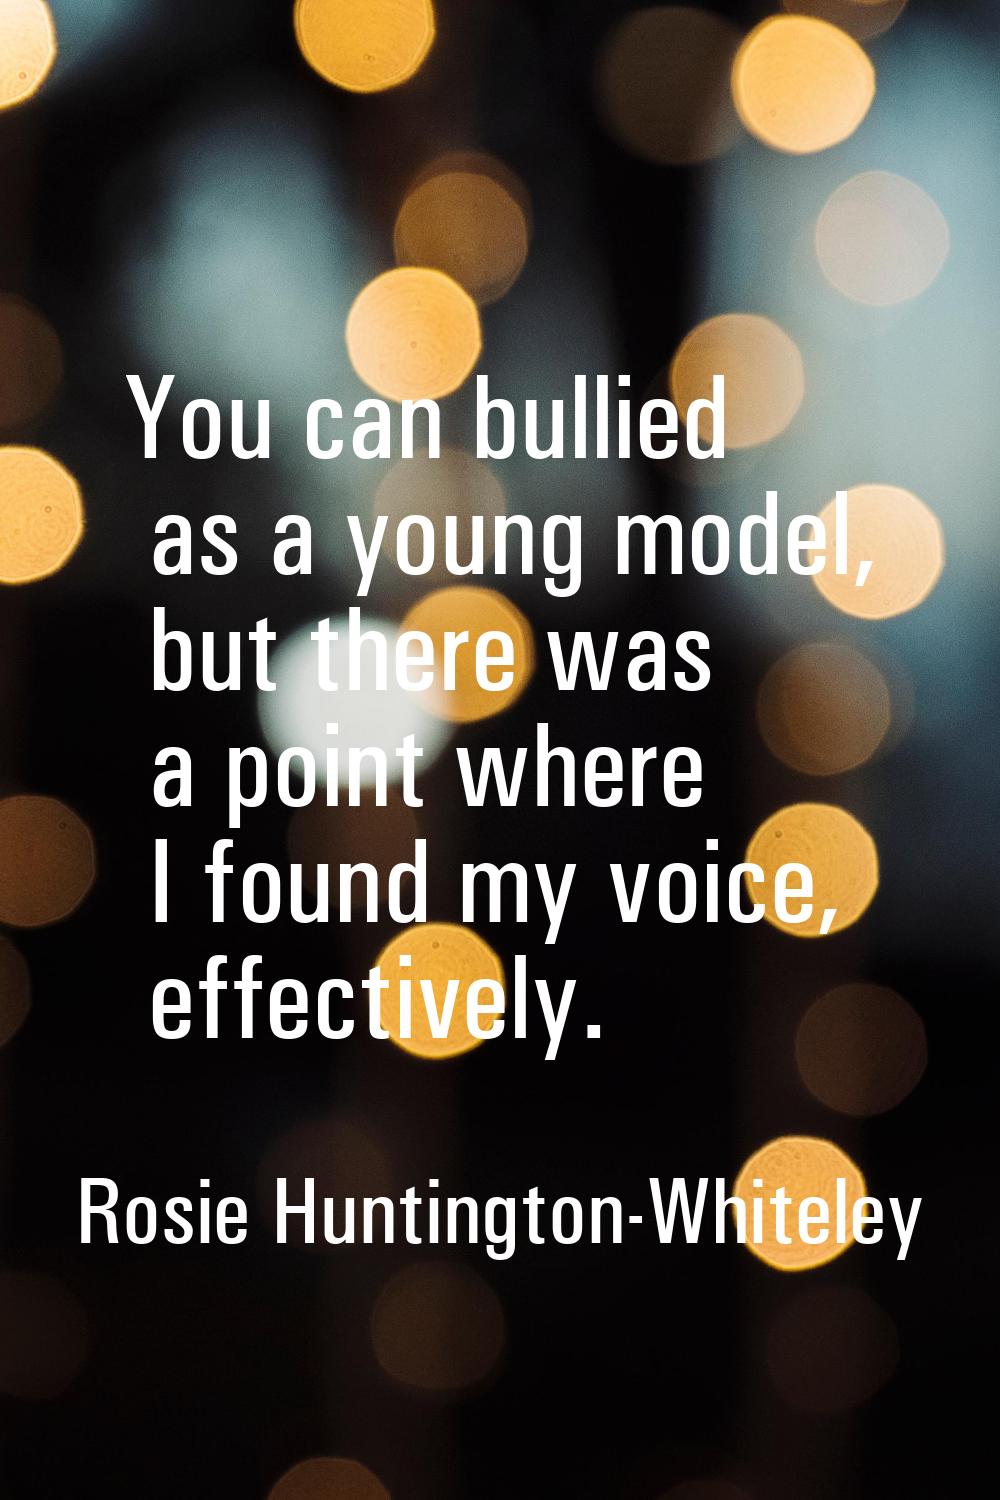 You can bullied as a young model, but there was a point where I found my voice, effectively.